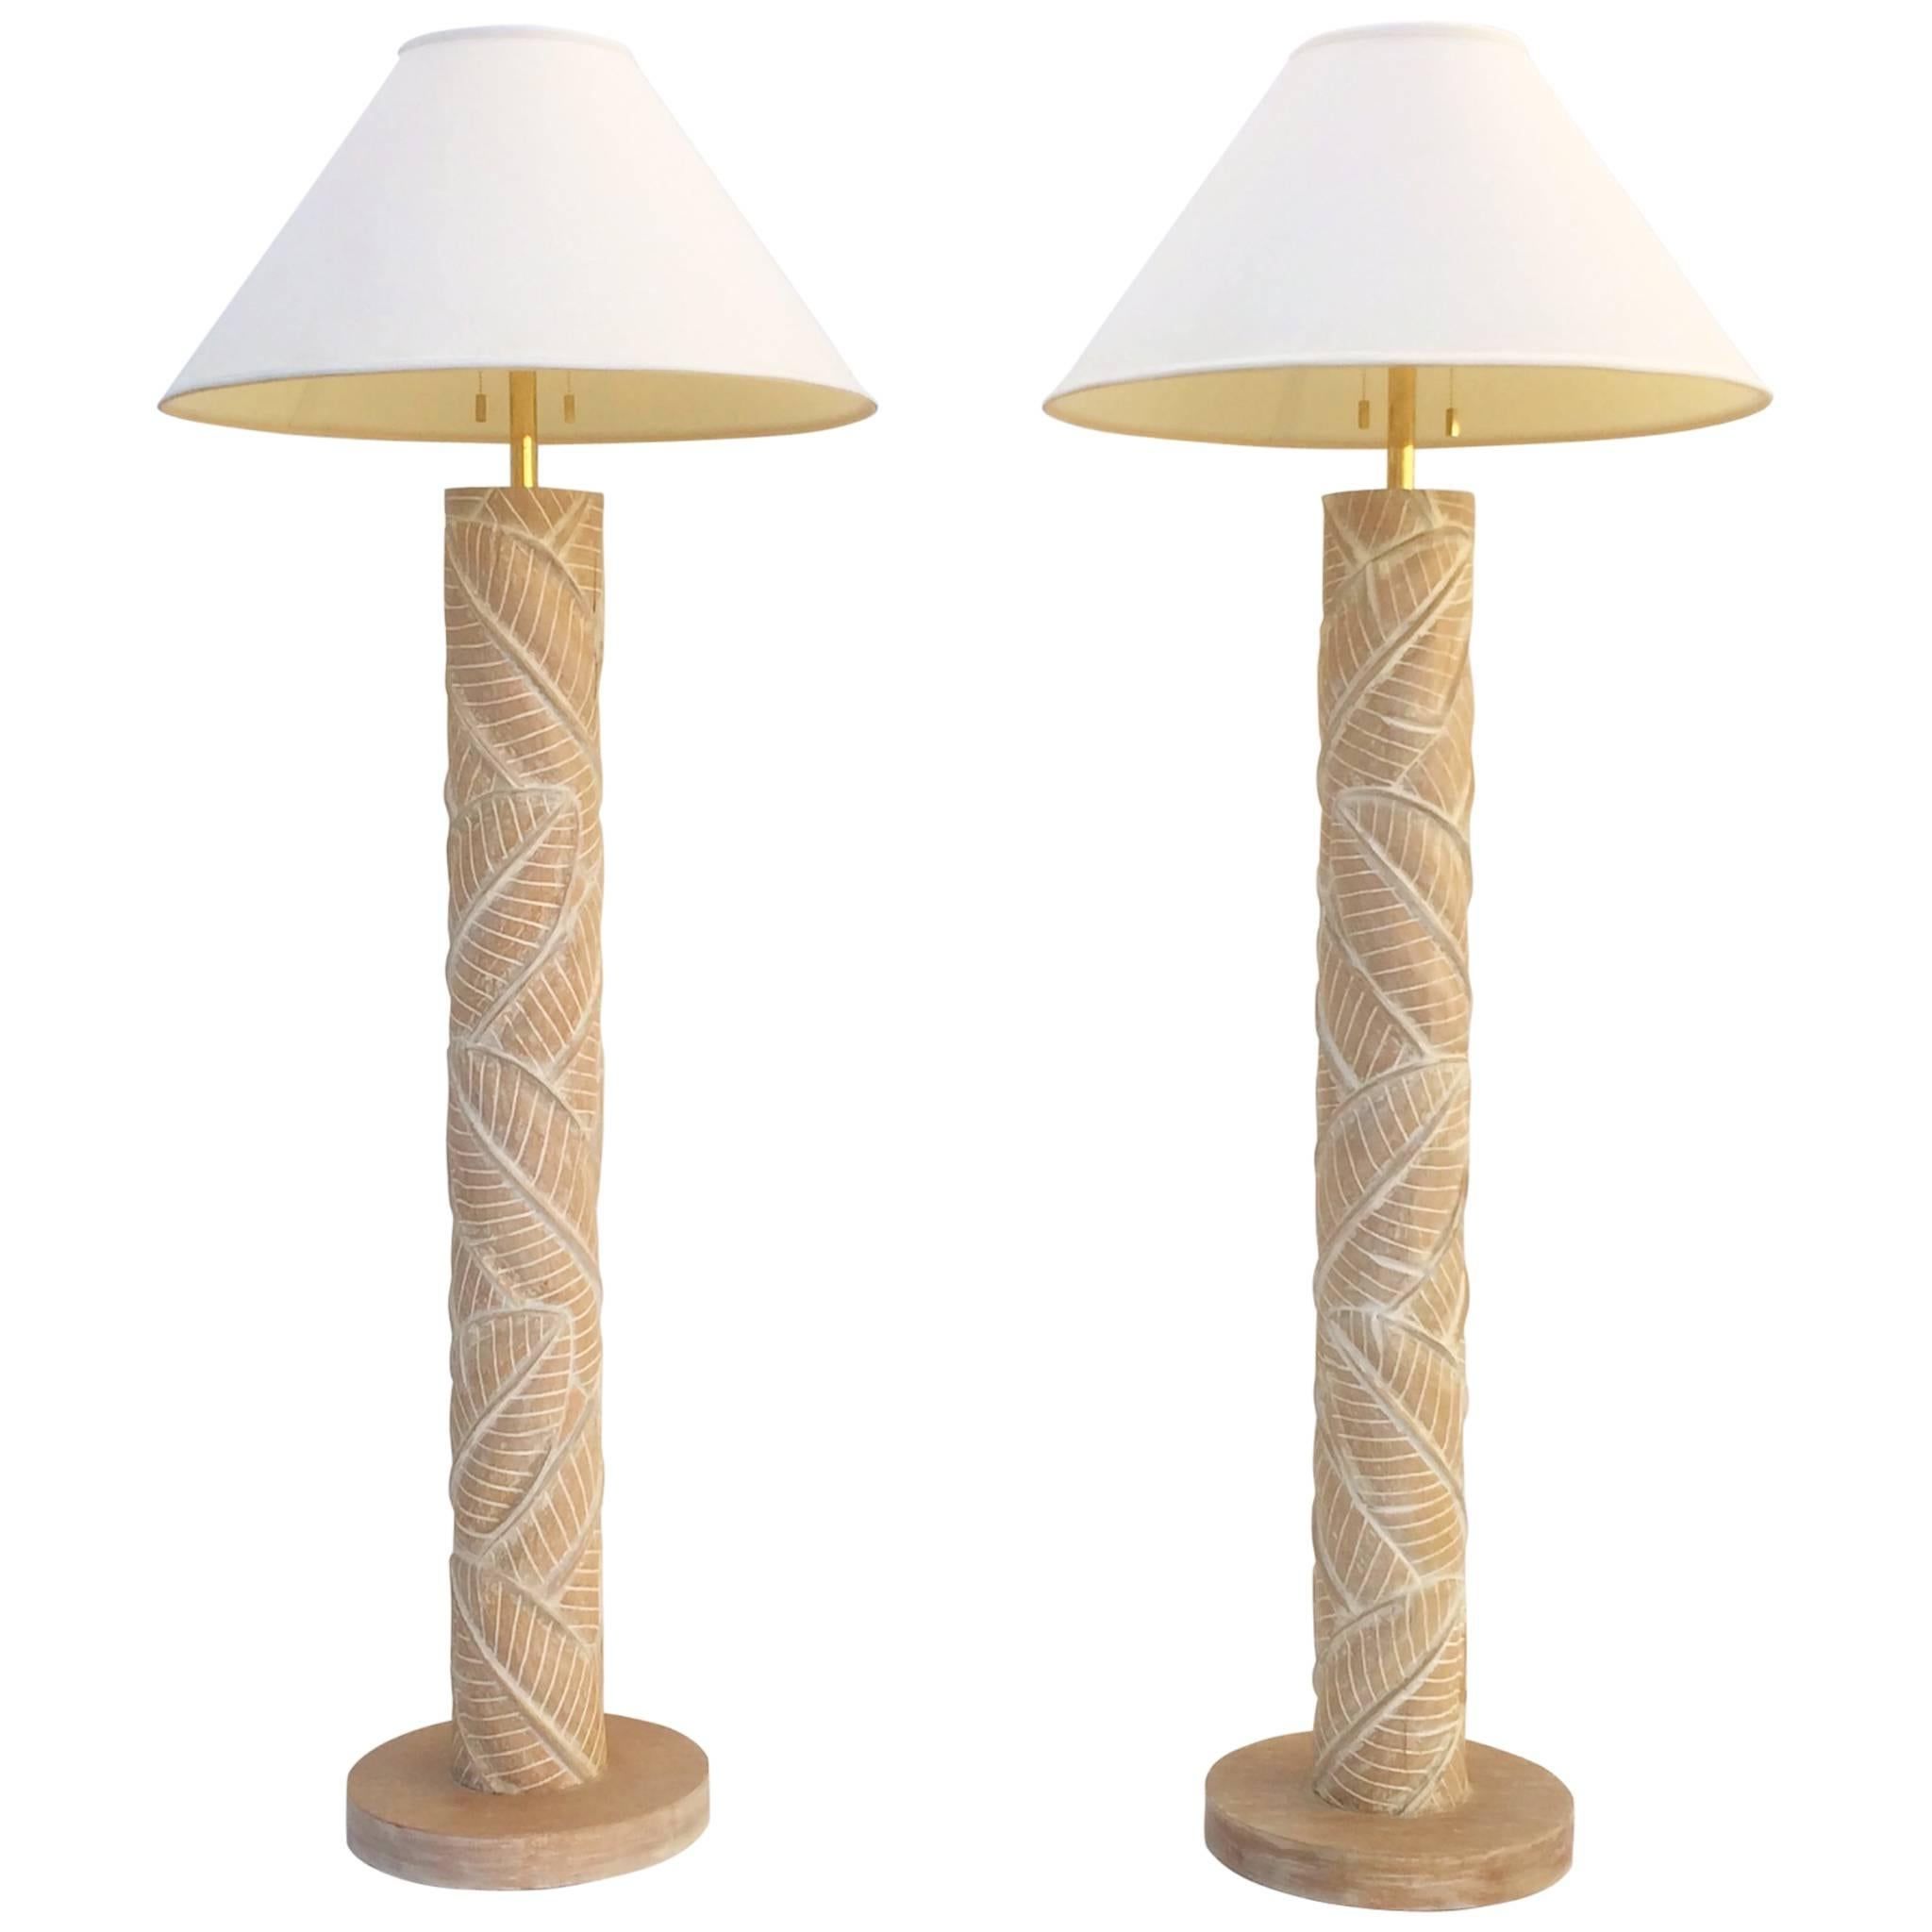 2020 Pair Of Carved Wood Floor Lamps For Sale At 1stdibs With Carved Pattern Standing Lamps (View 1 of 10)